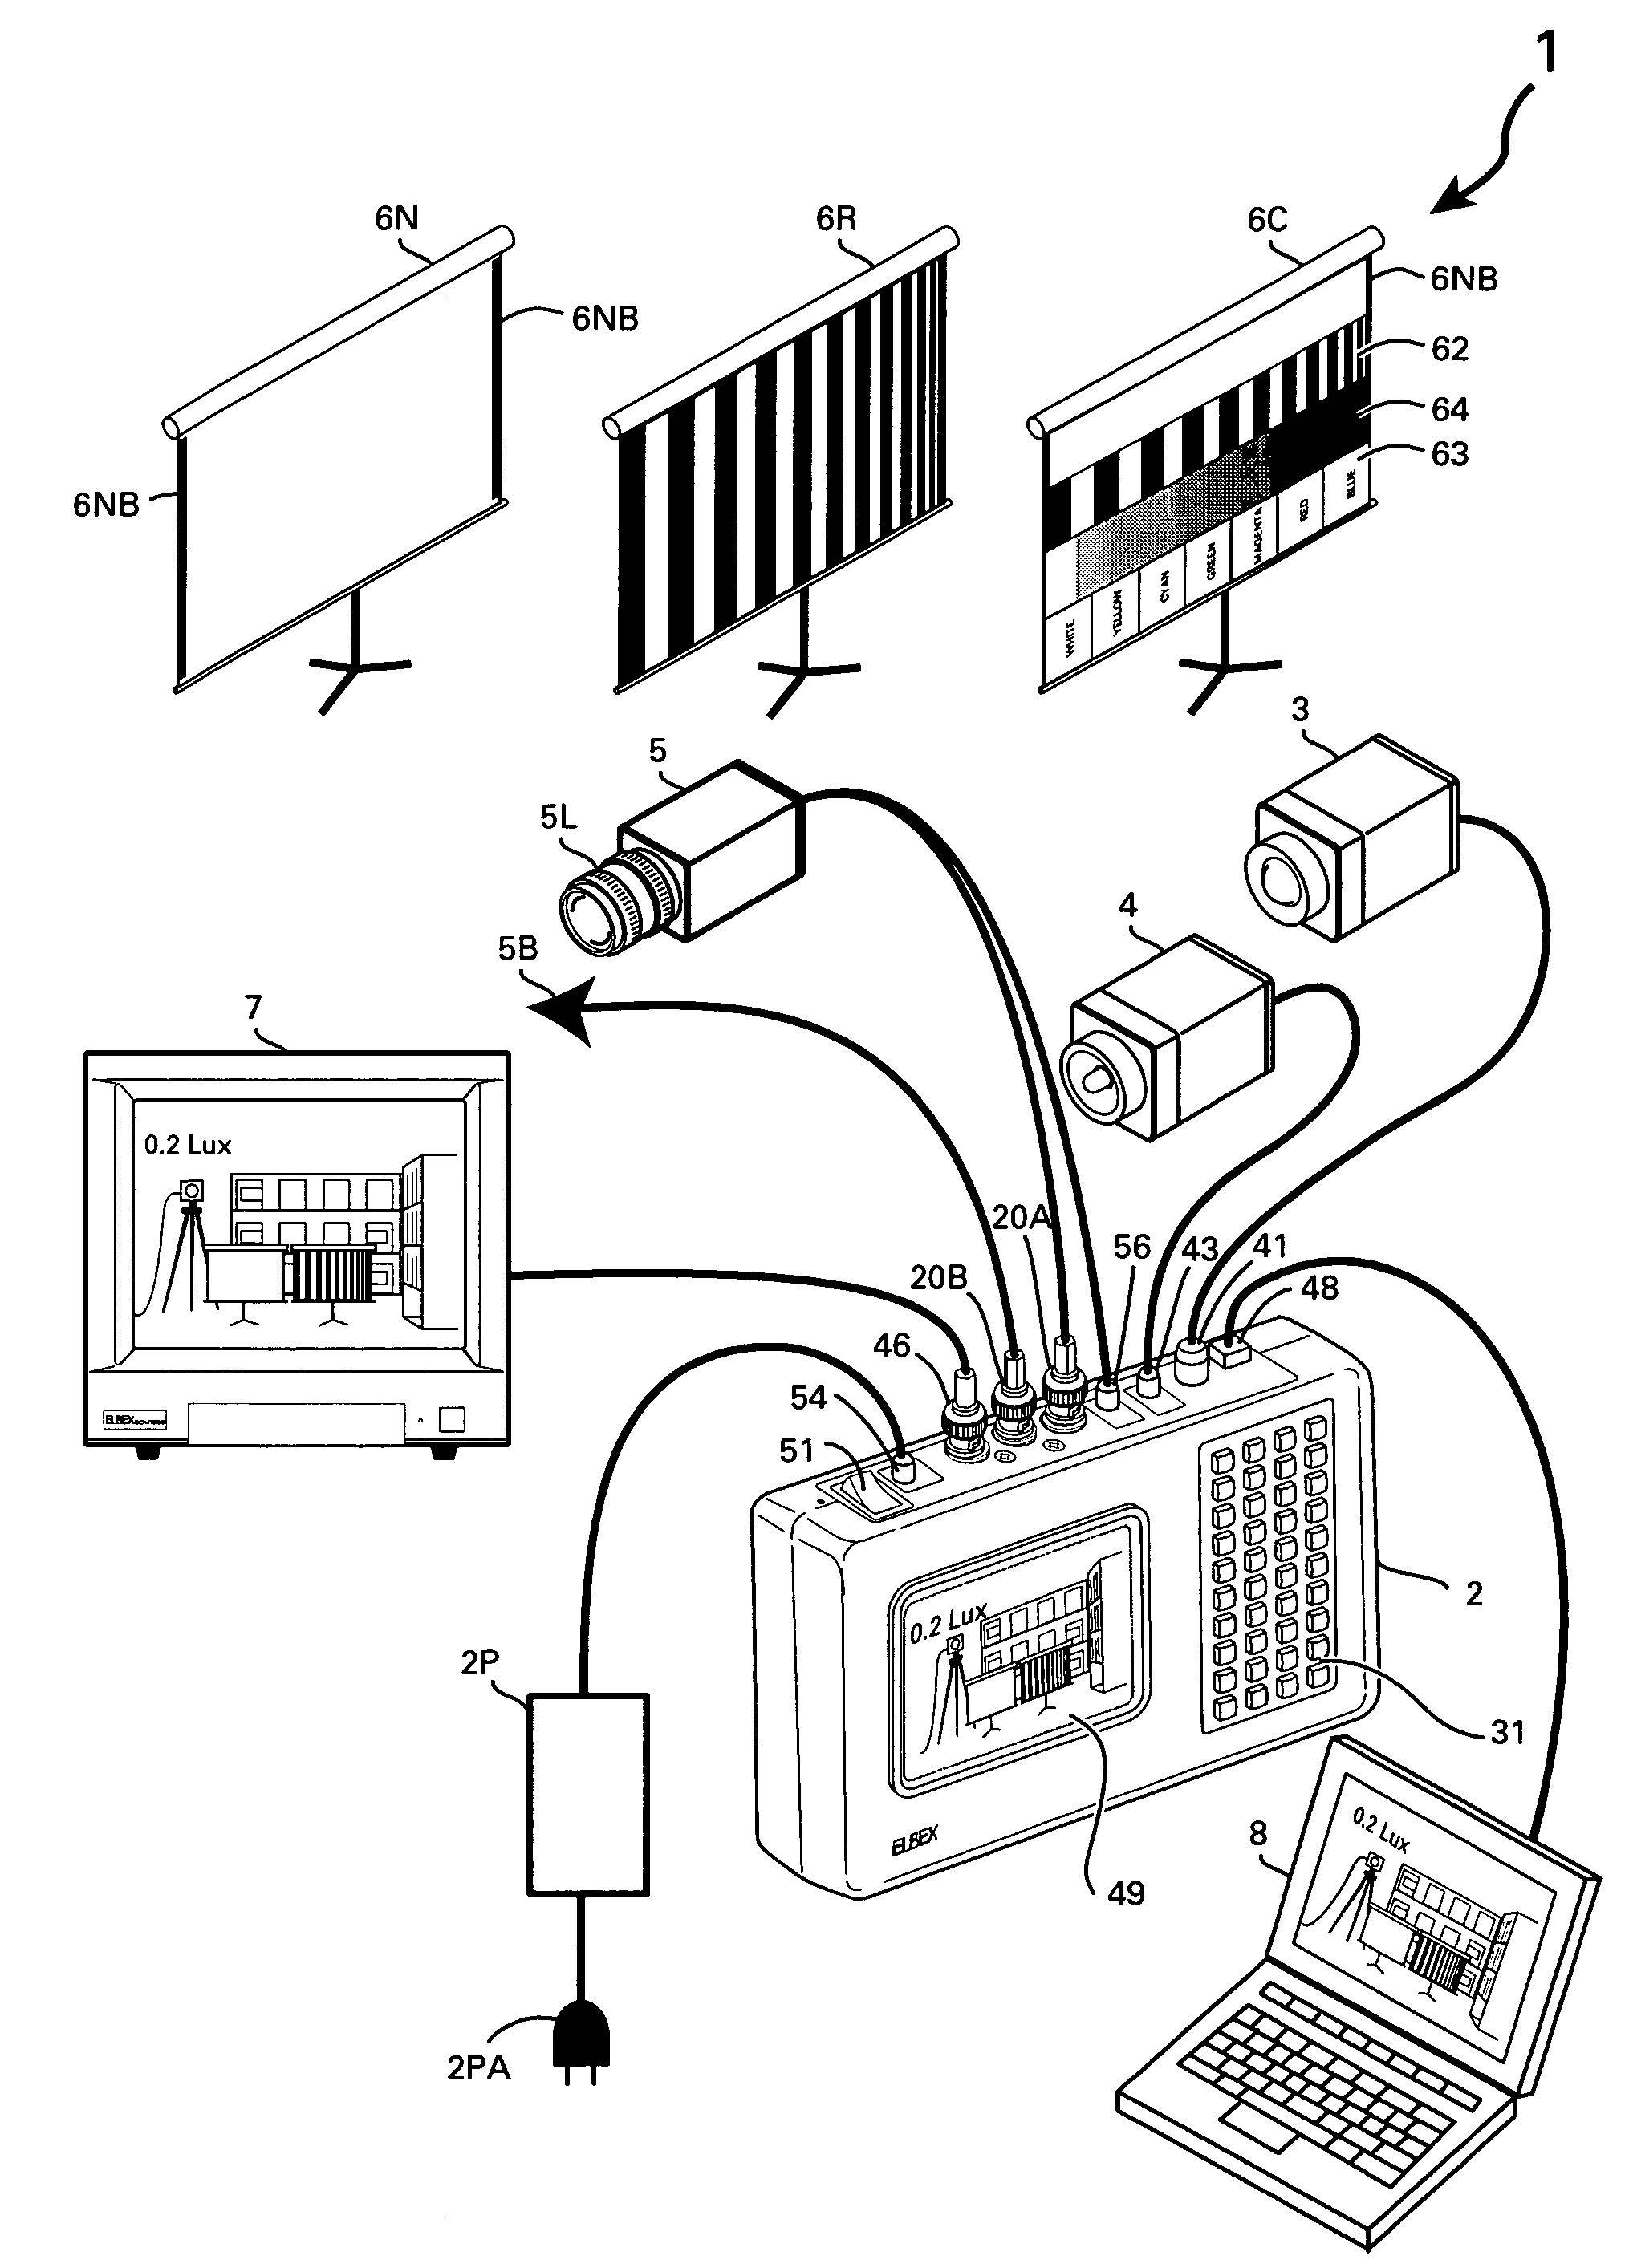 Method and apparatus for measuring illumination and camera performances